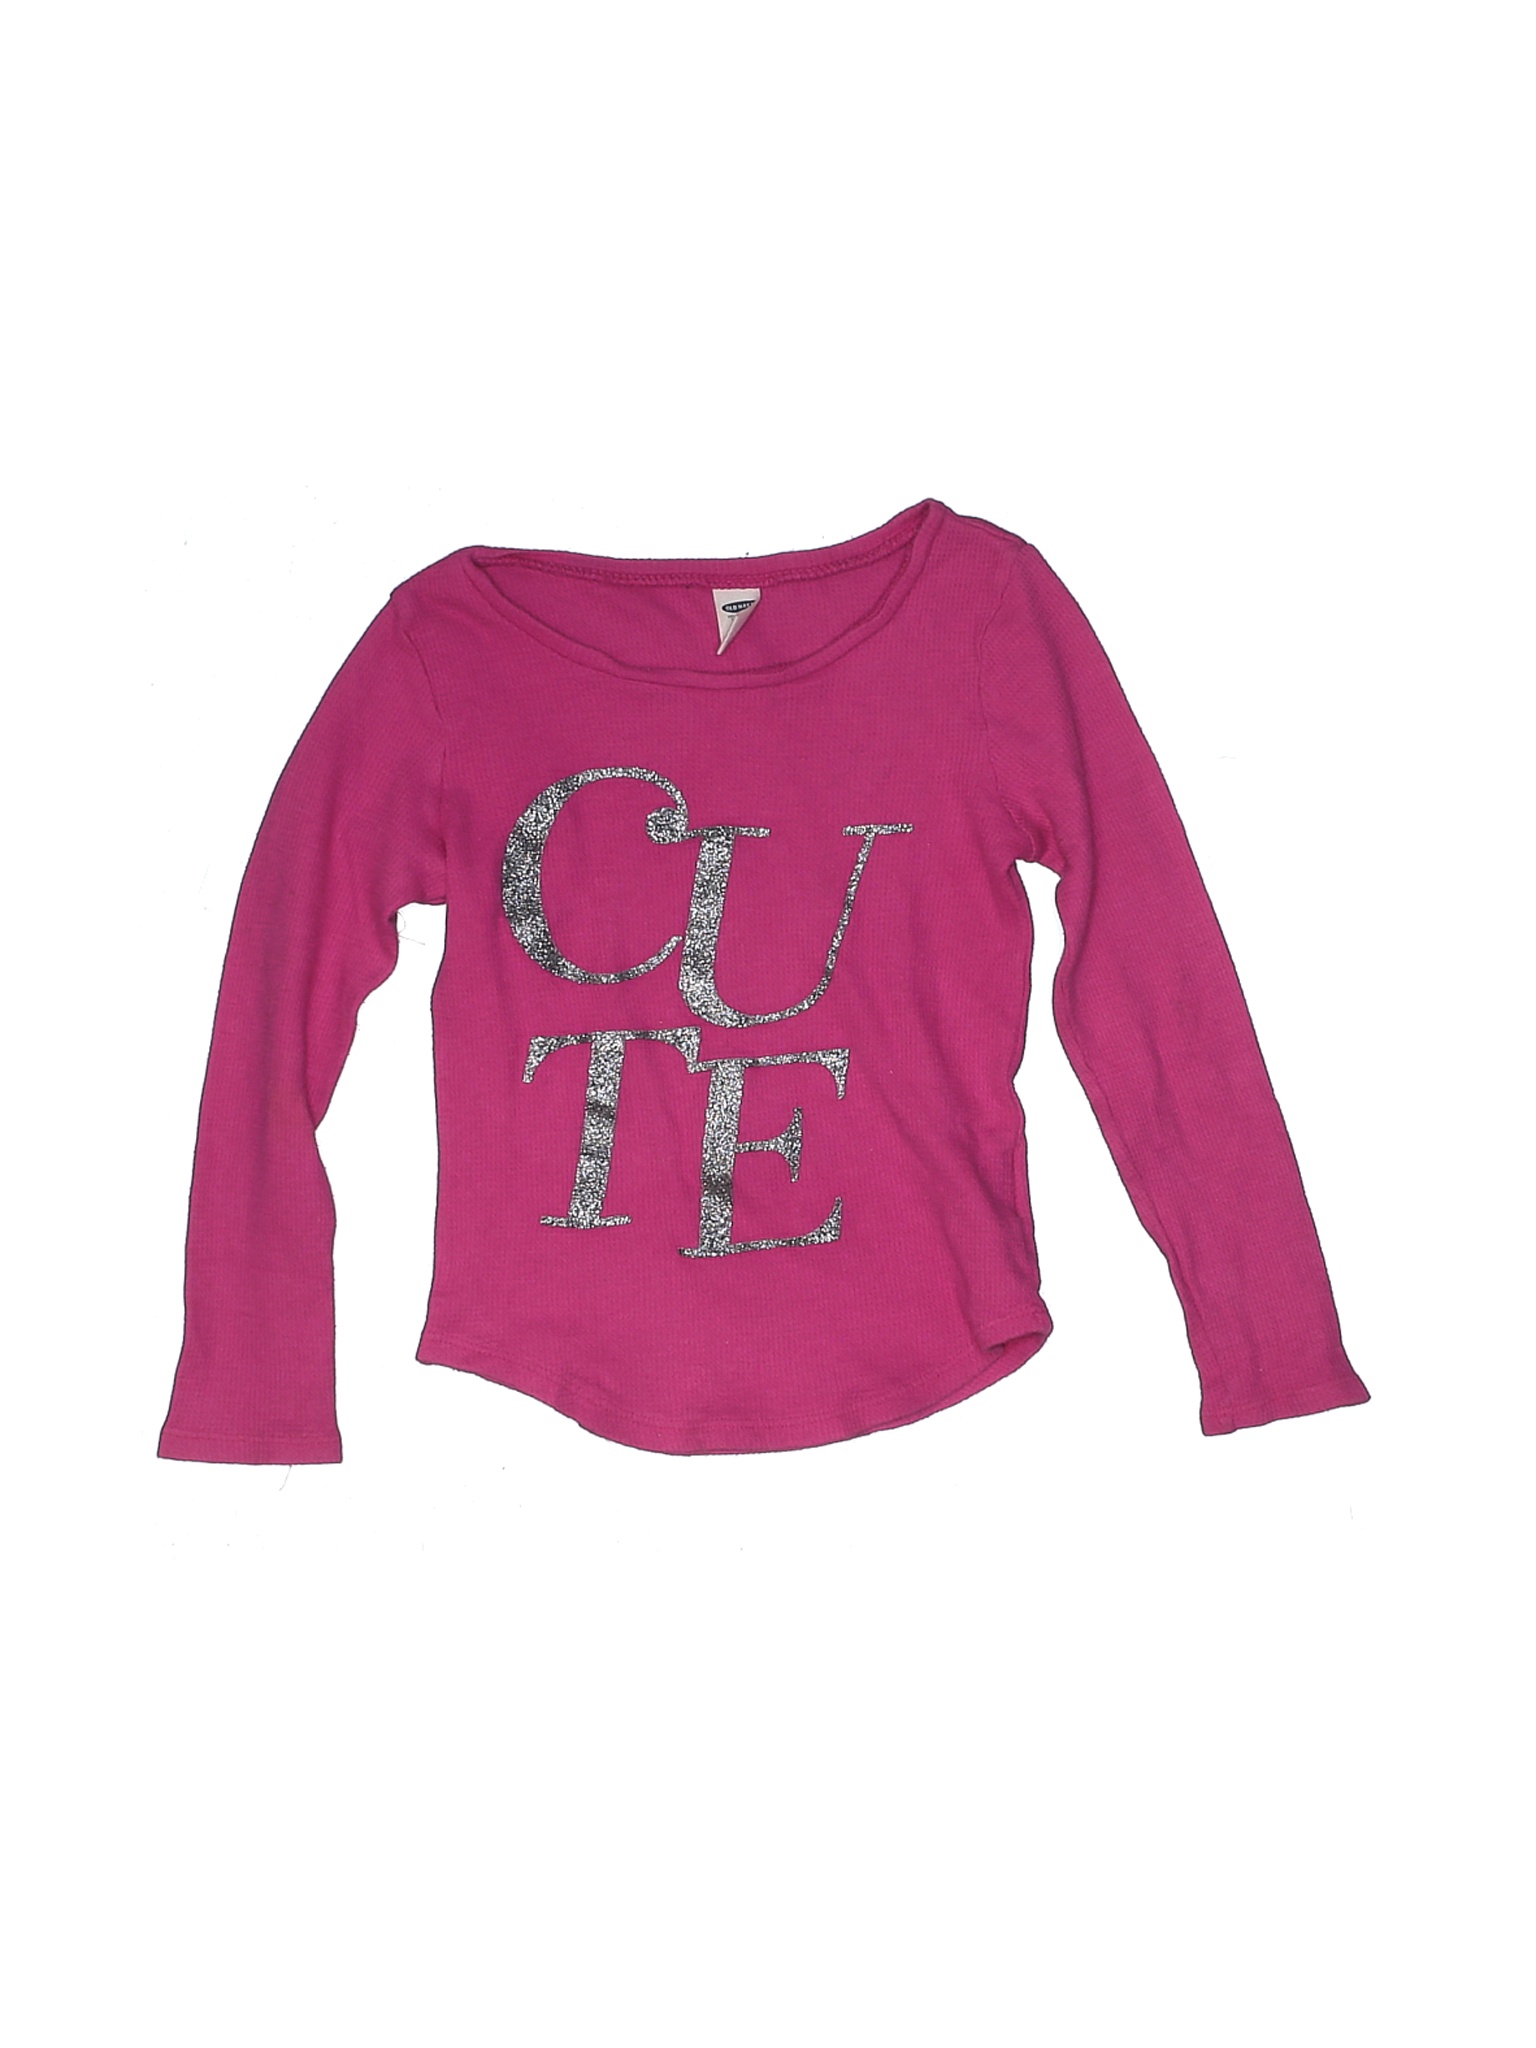 Old Navy Girls Pink Pullover Sweater X-Small kids | eBay